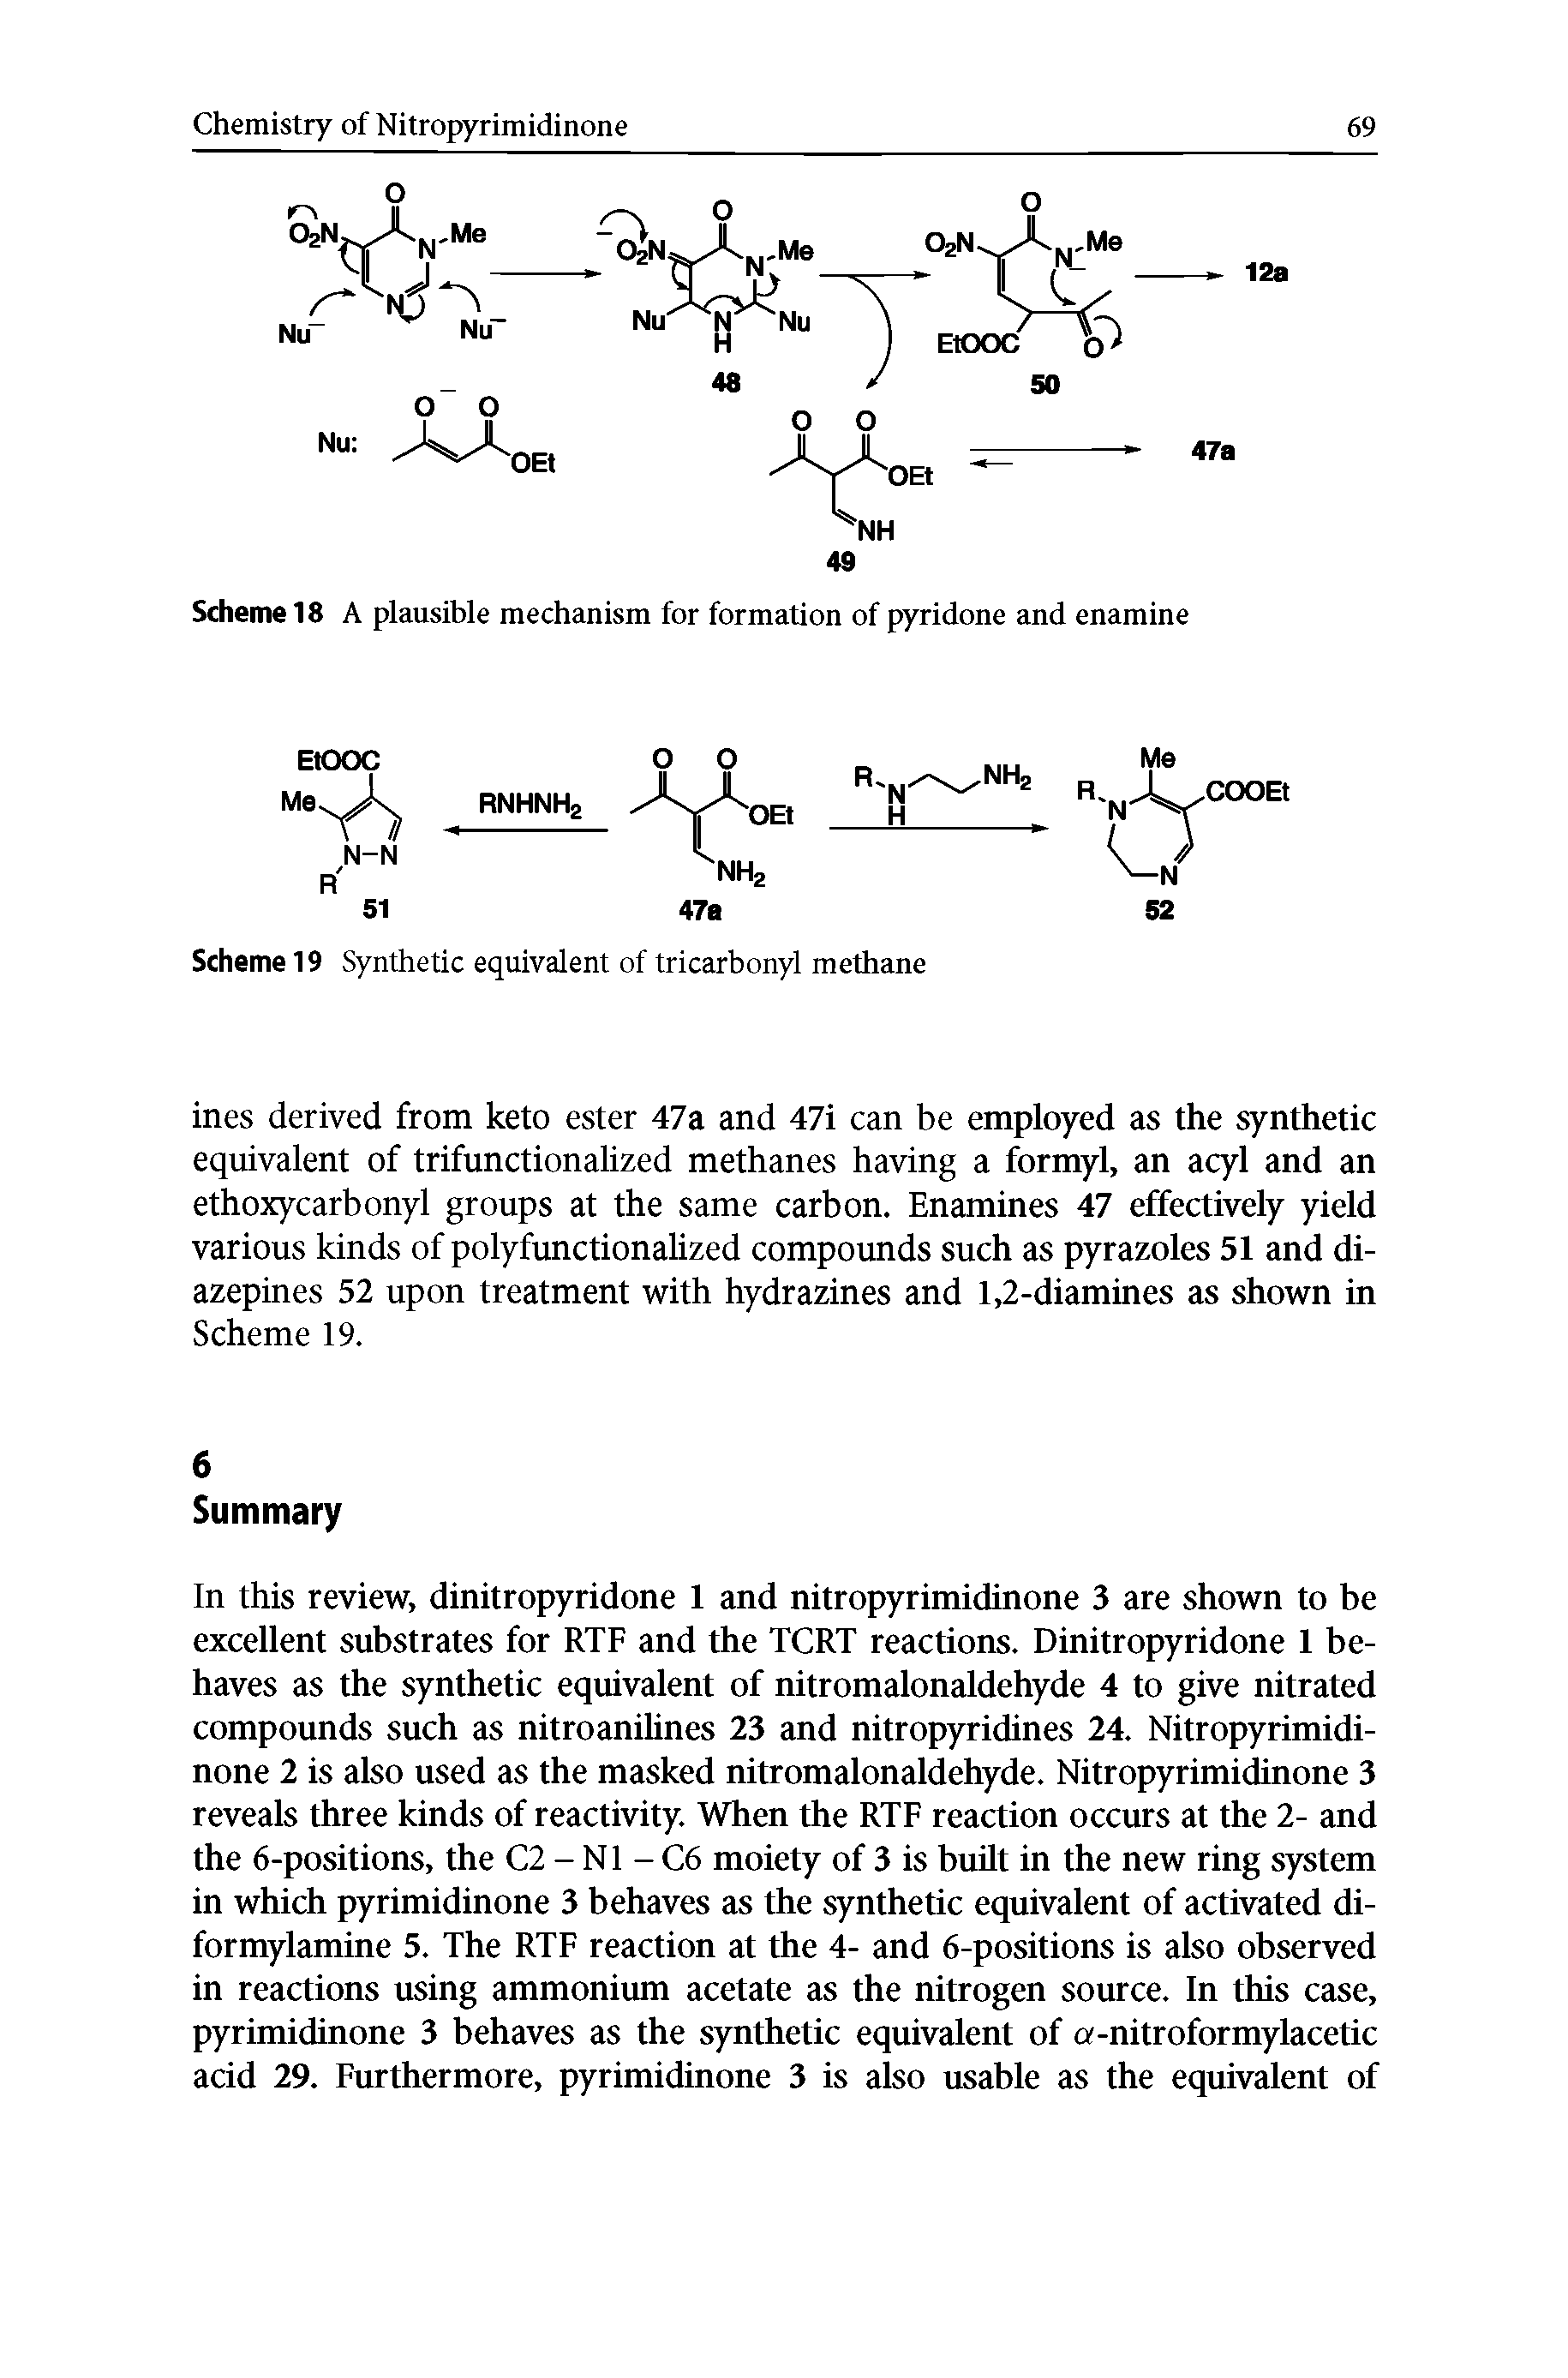 Scheme 18 A plausible mechanism for formation of pyridone and enamine...